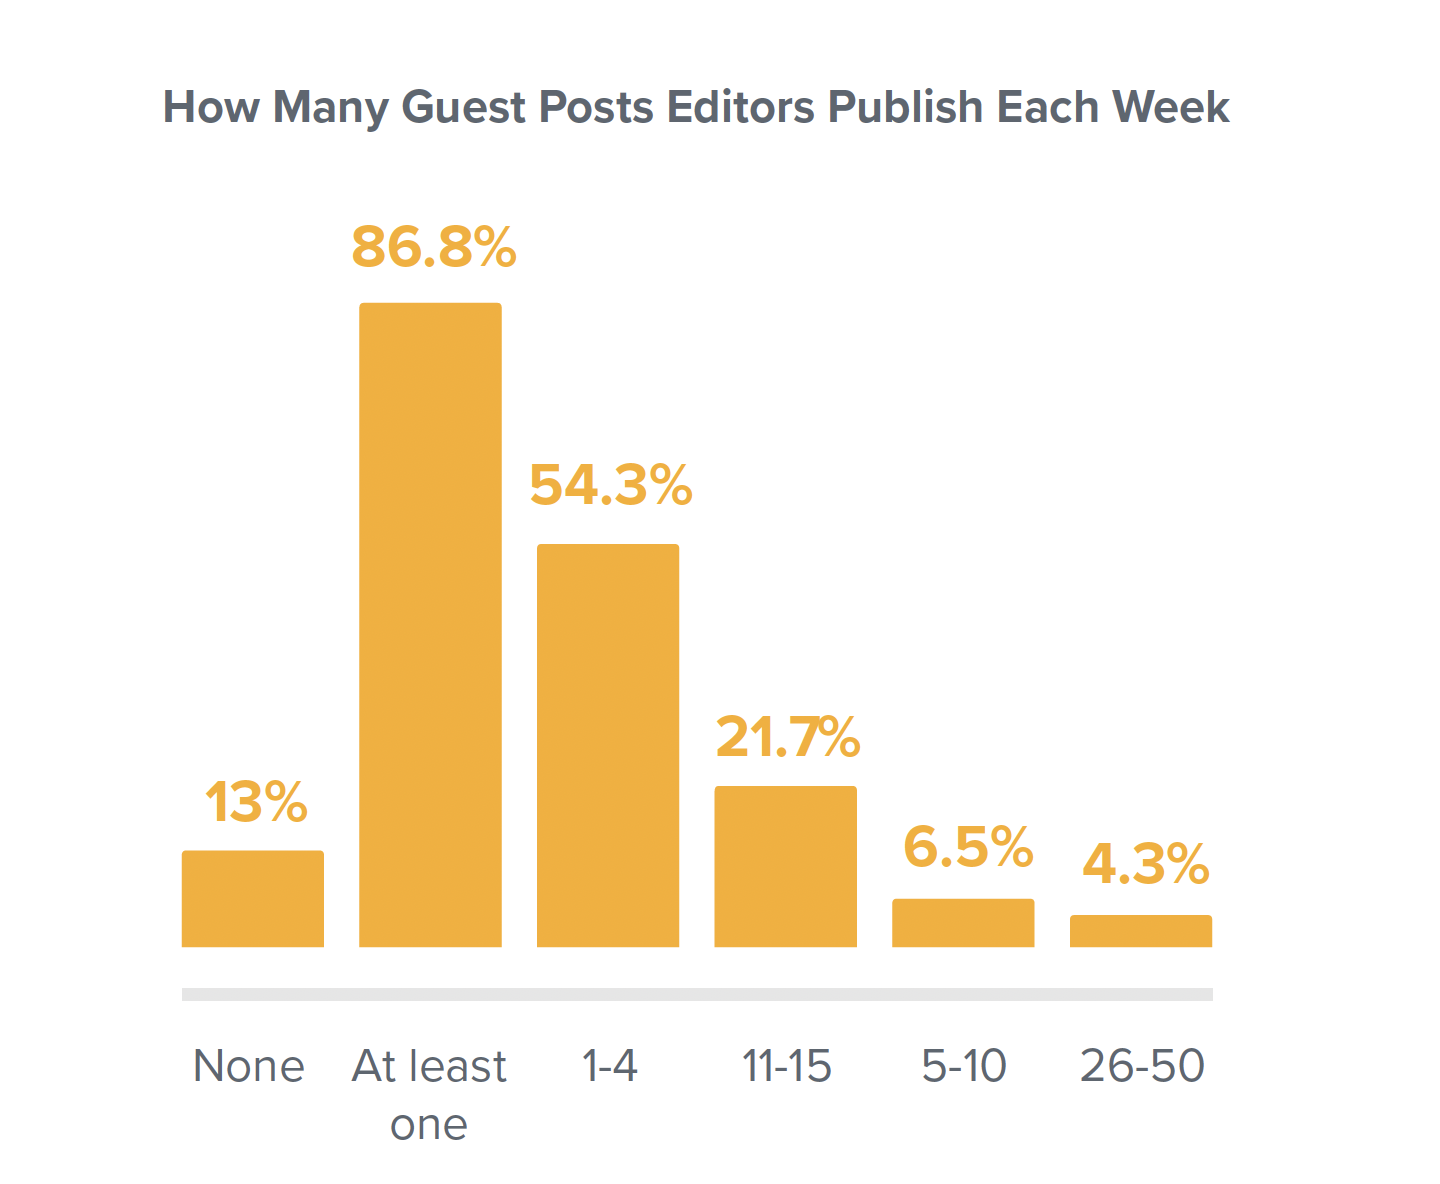 A bar graph showing how many guest posts editors publish each week.